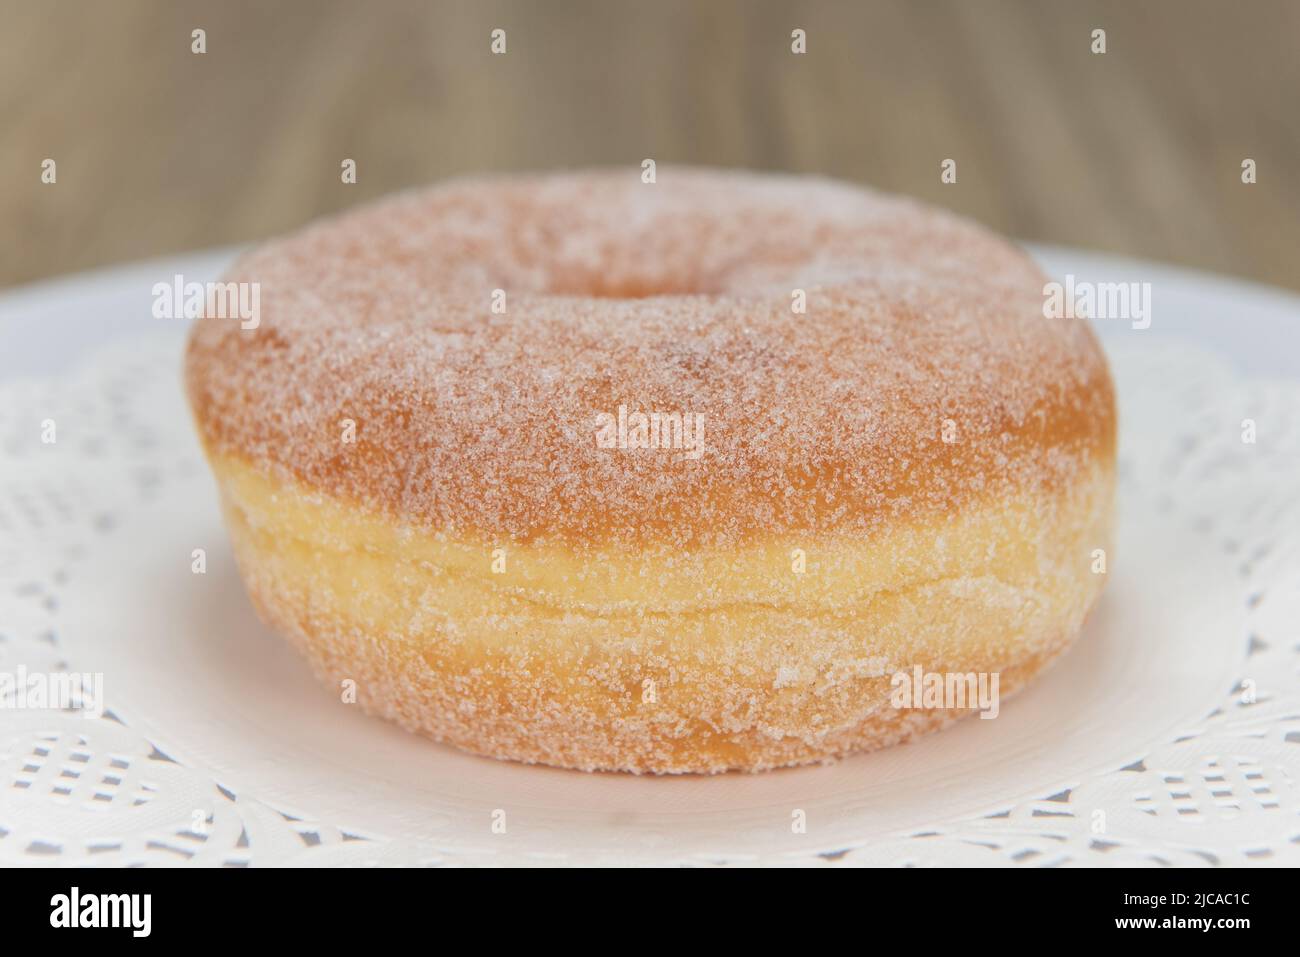 Tempting fresh from the oven sugar glazed donut from the bakery served on a plate. Stock Photo